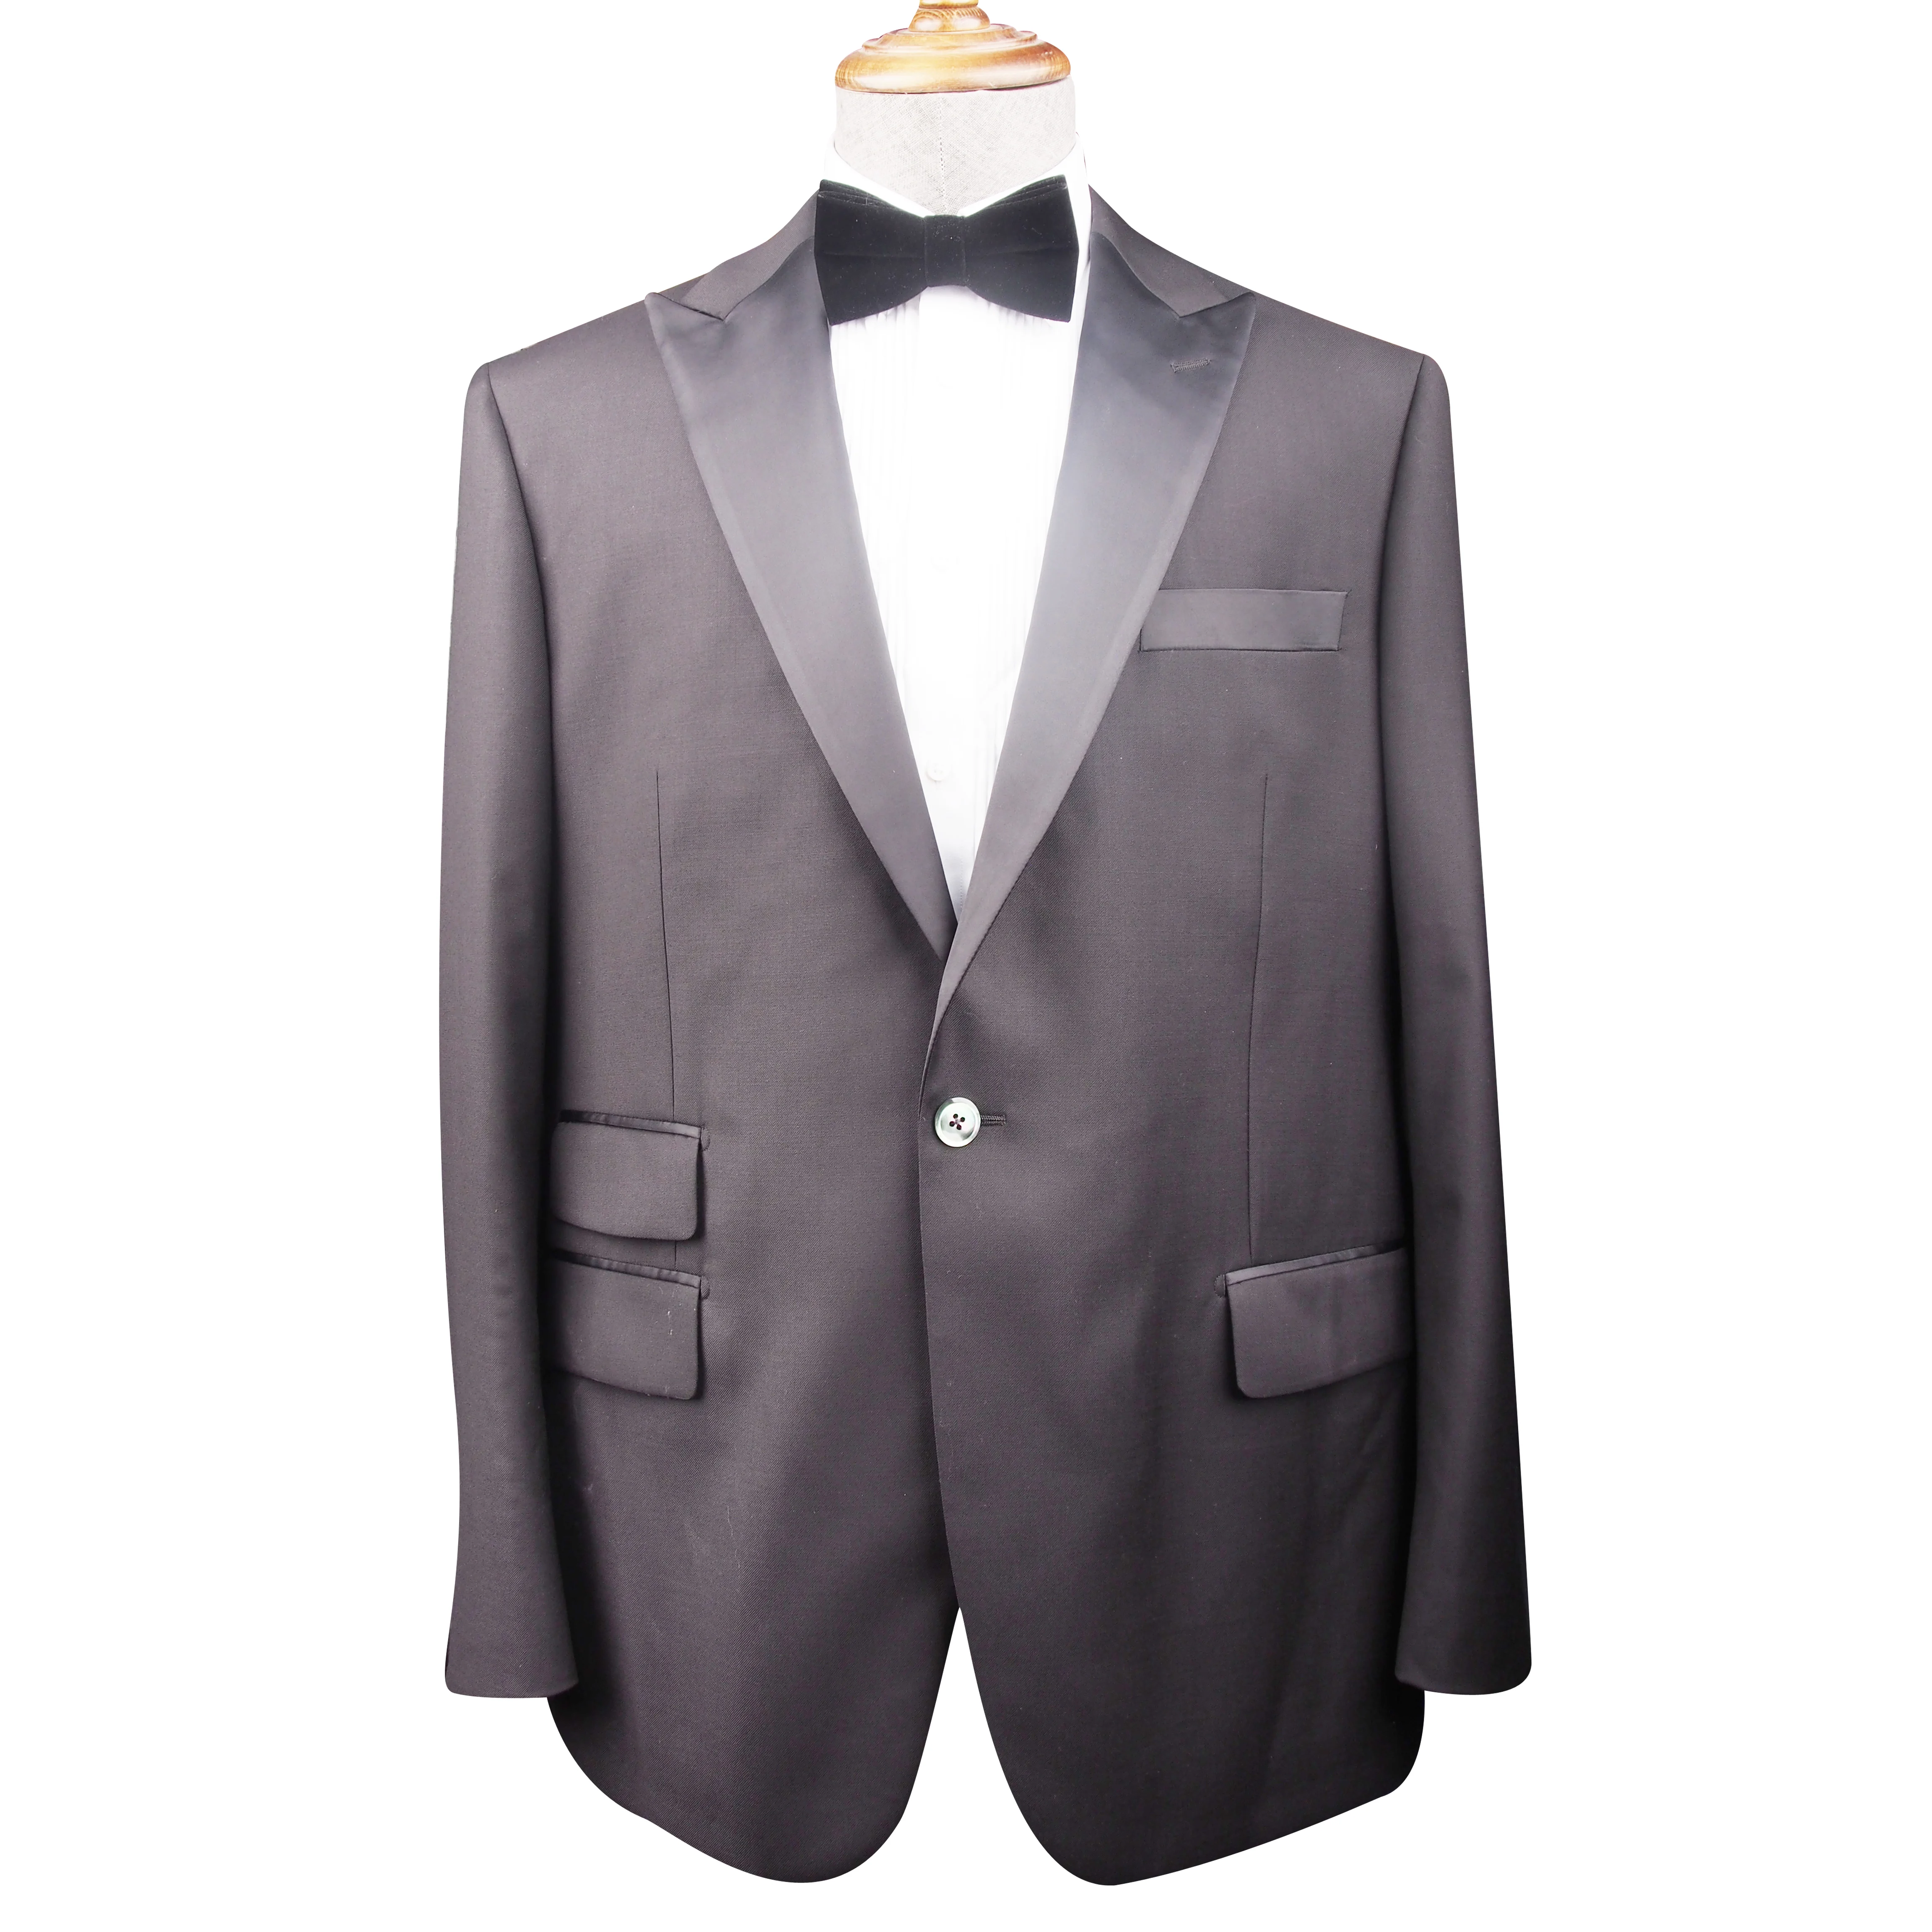 made in China wholesale 2 κομμάτια 100% Wool  Tuxedo Suit modern men's suit